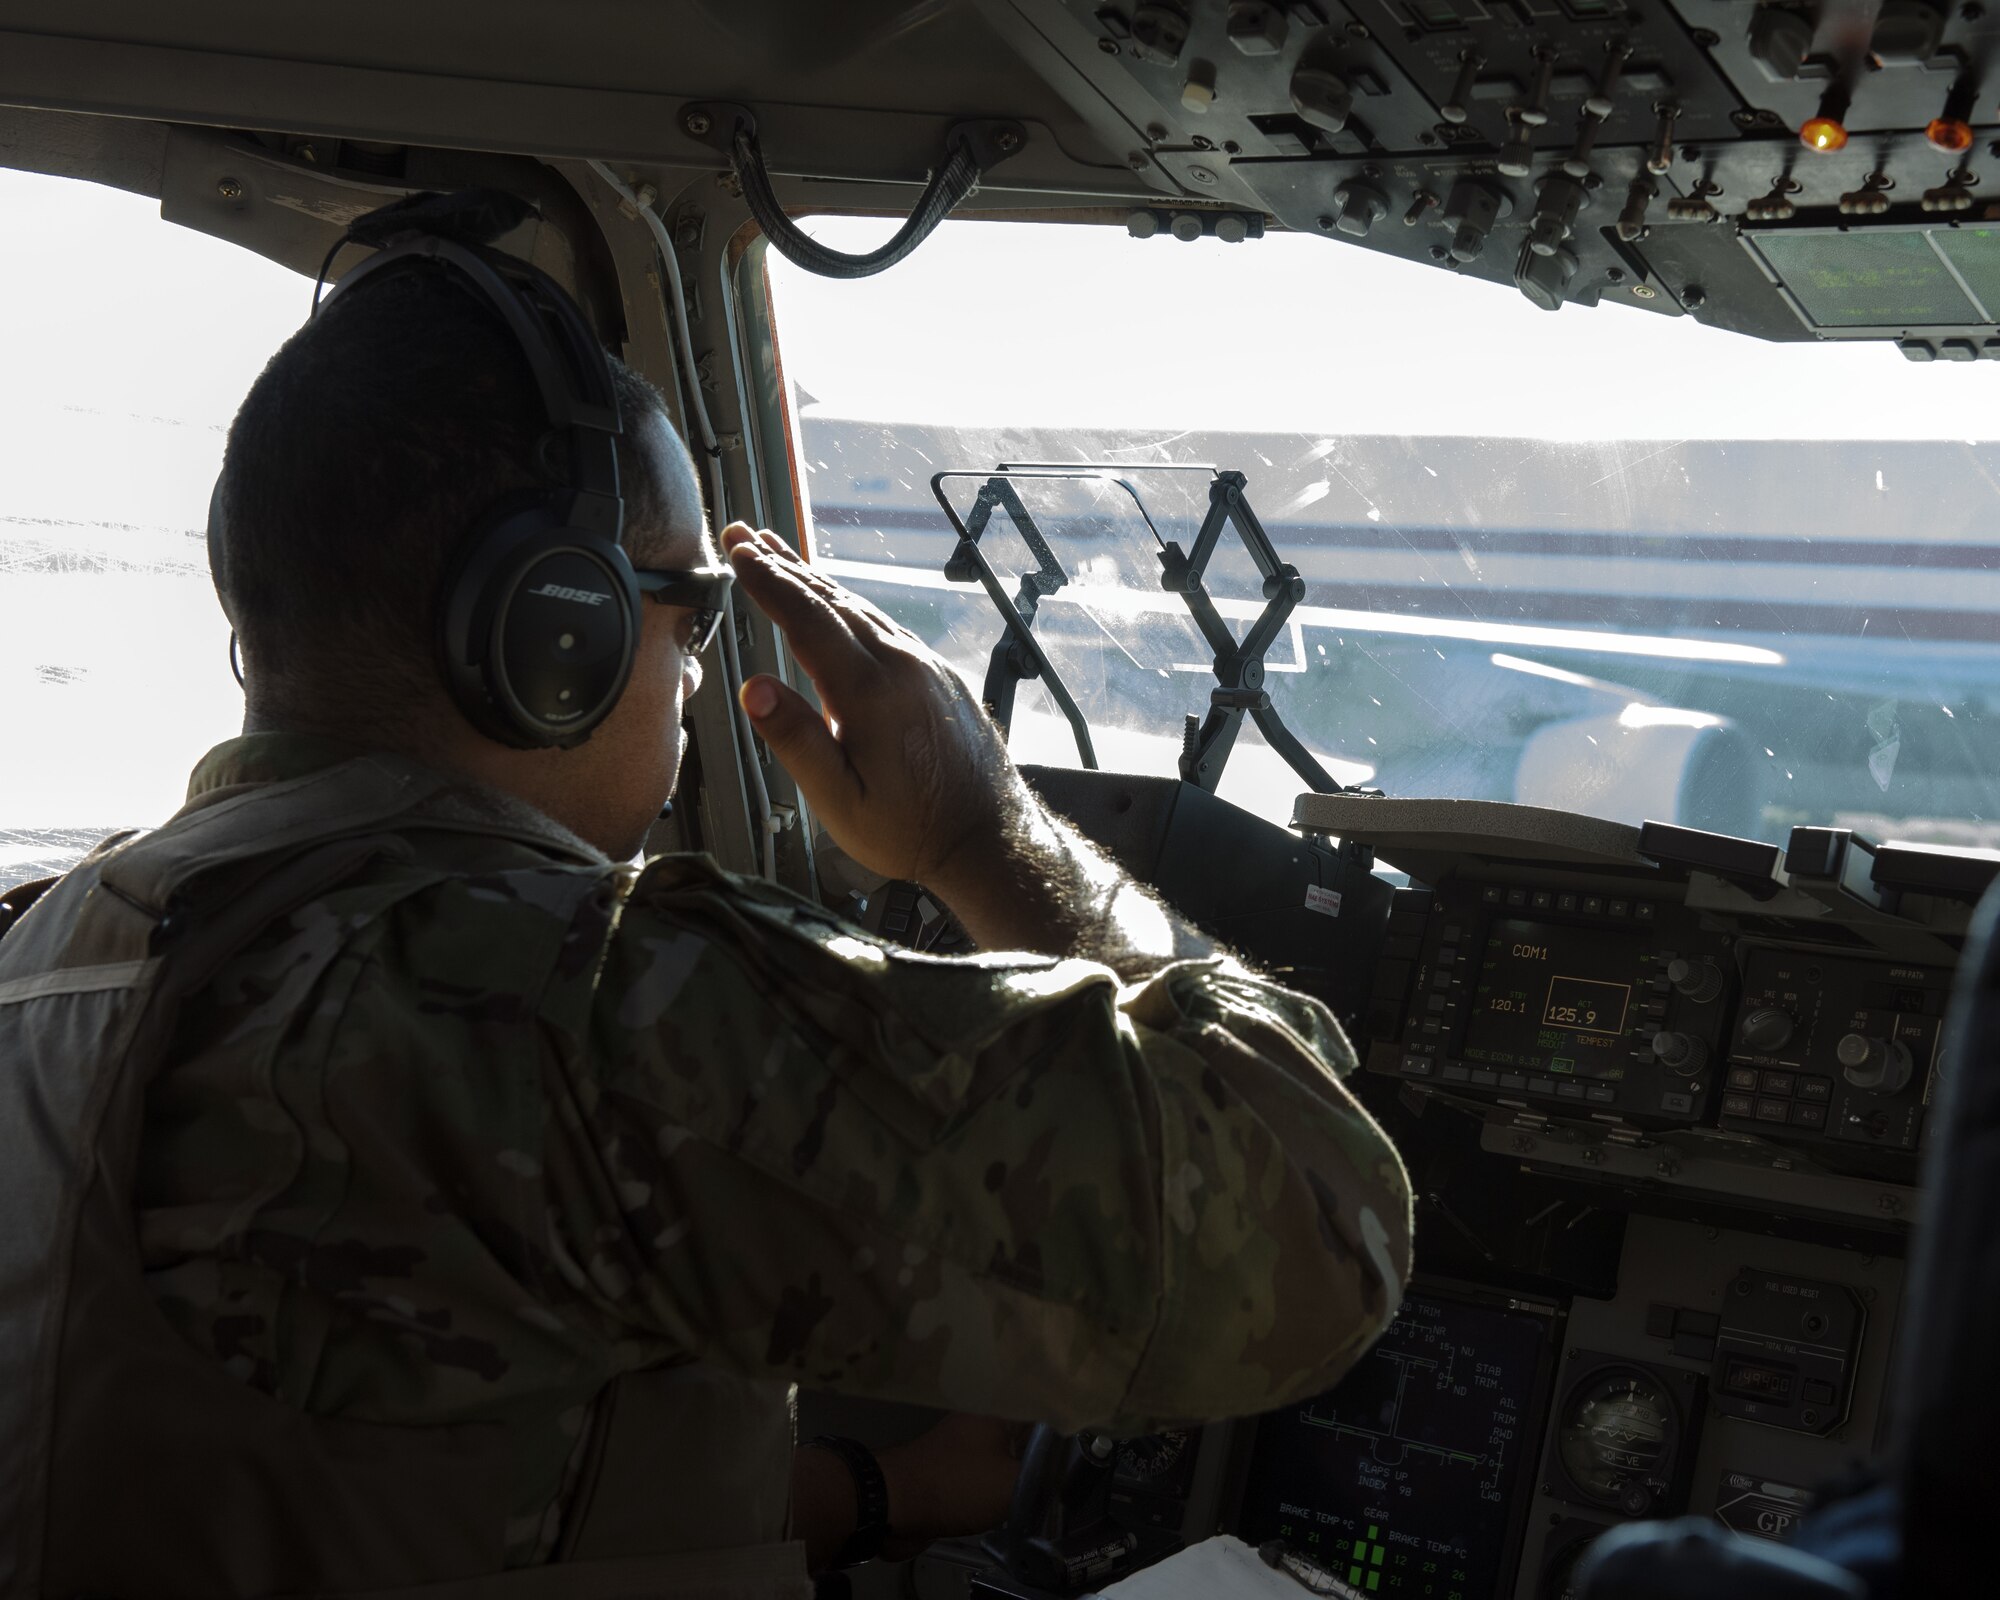 U.S. Air Force Maj. Roger Gates, 21st Airlift Squadron pilot, renders a salute from a C-17 Globemaster III to a passing aircraft on the flight line at Bagram Airfield, Afghanistan, May 26, 2019. The C-17 is capable of rapid strategic delivery of troops and cargo anywhere in the world. (U.S. Air Force photo by Tech. Sgt. Traci Keller)